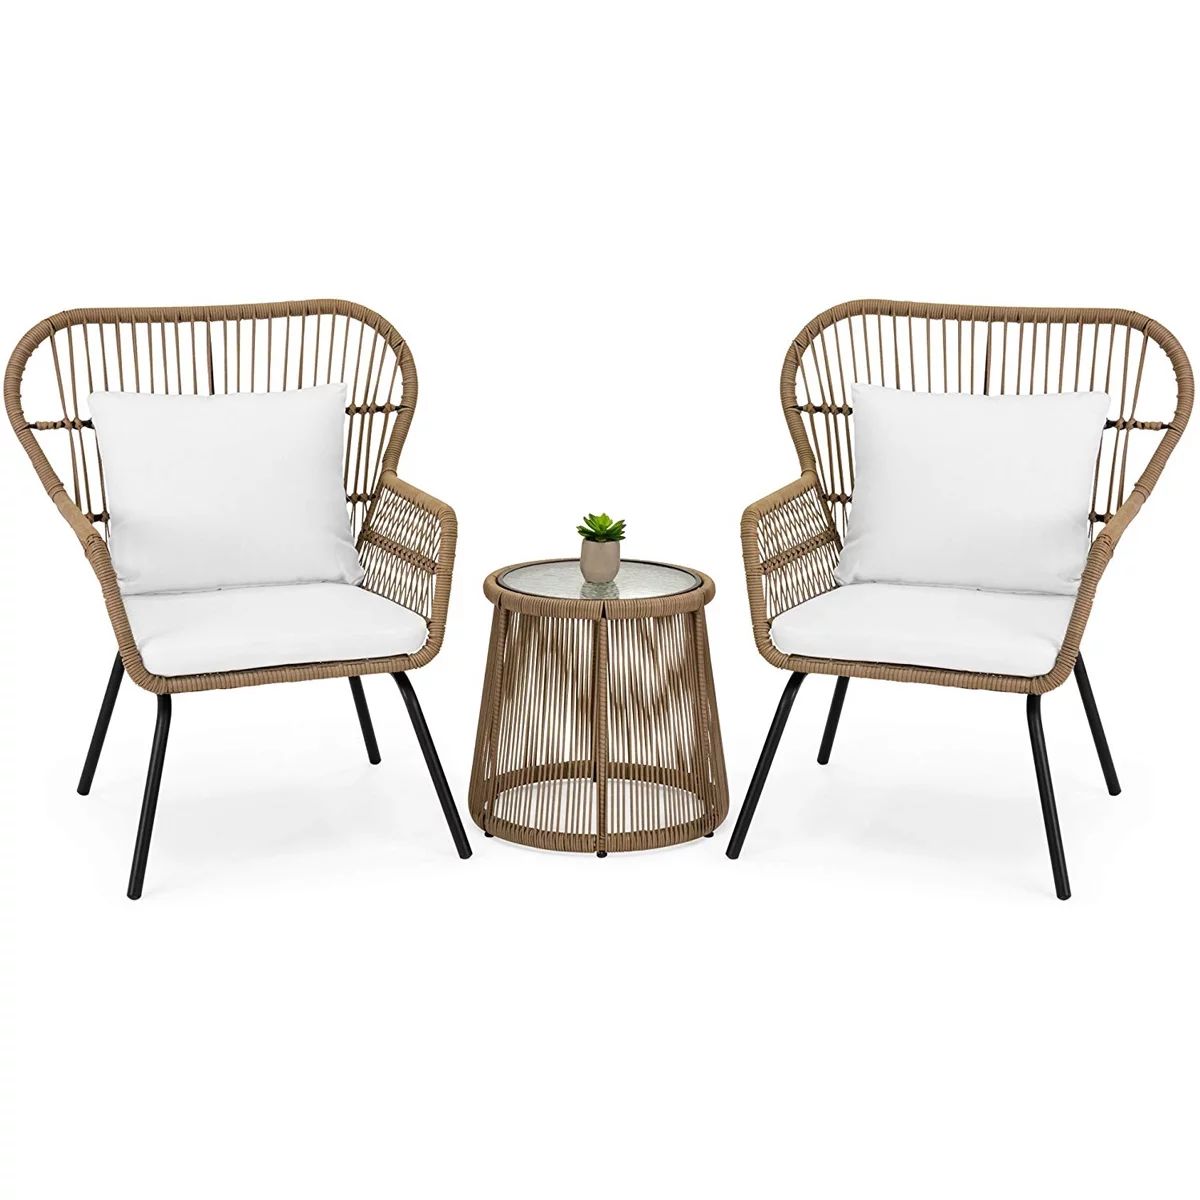 3-Piece Patio Wicker Conversation Bistro Set w/ 2-Chairs, Glass Top Side Table, Cushions | Walmart (US)